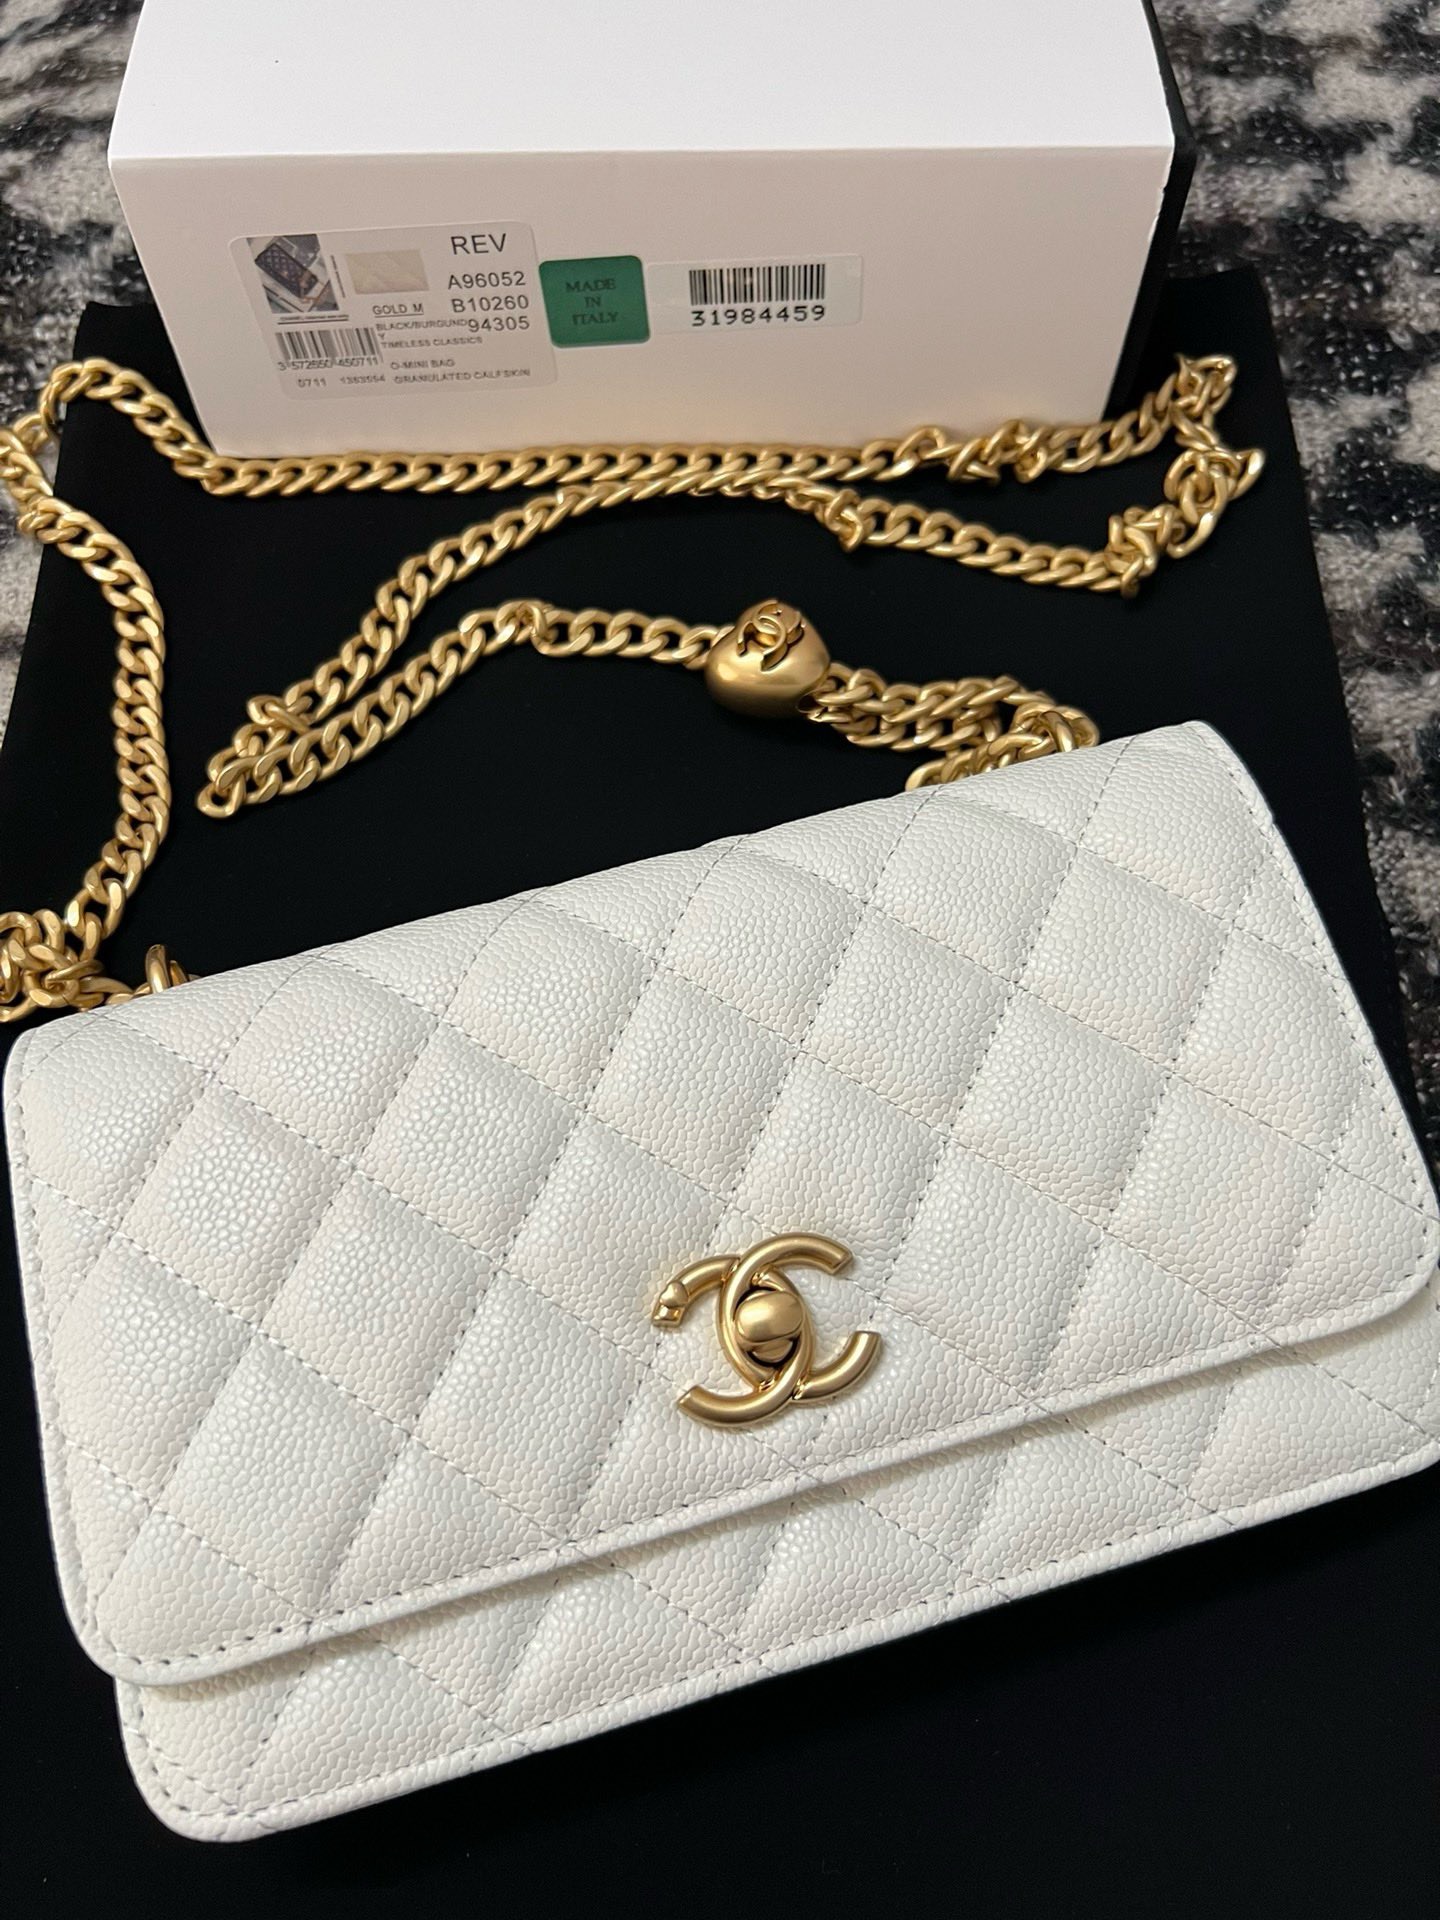 CHANEL WALLET ON CHAIN AP3971 white